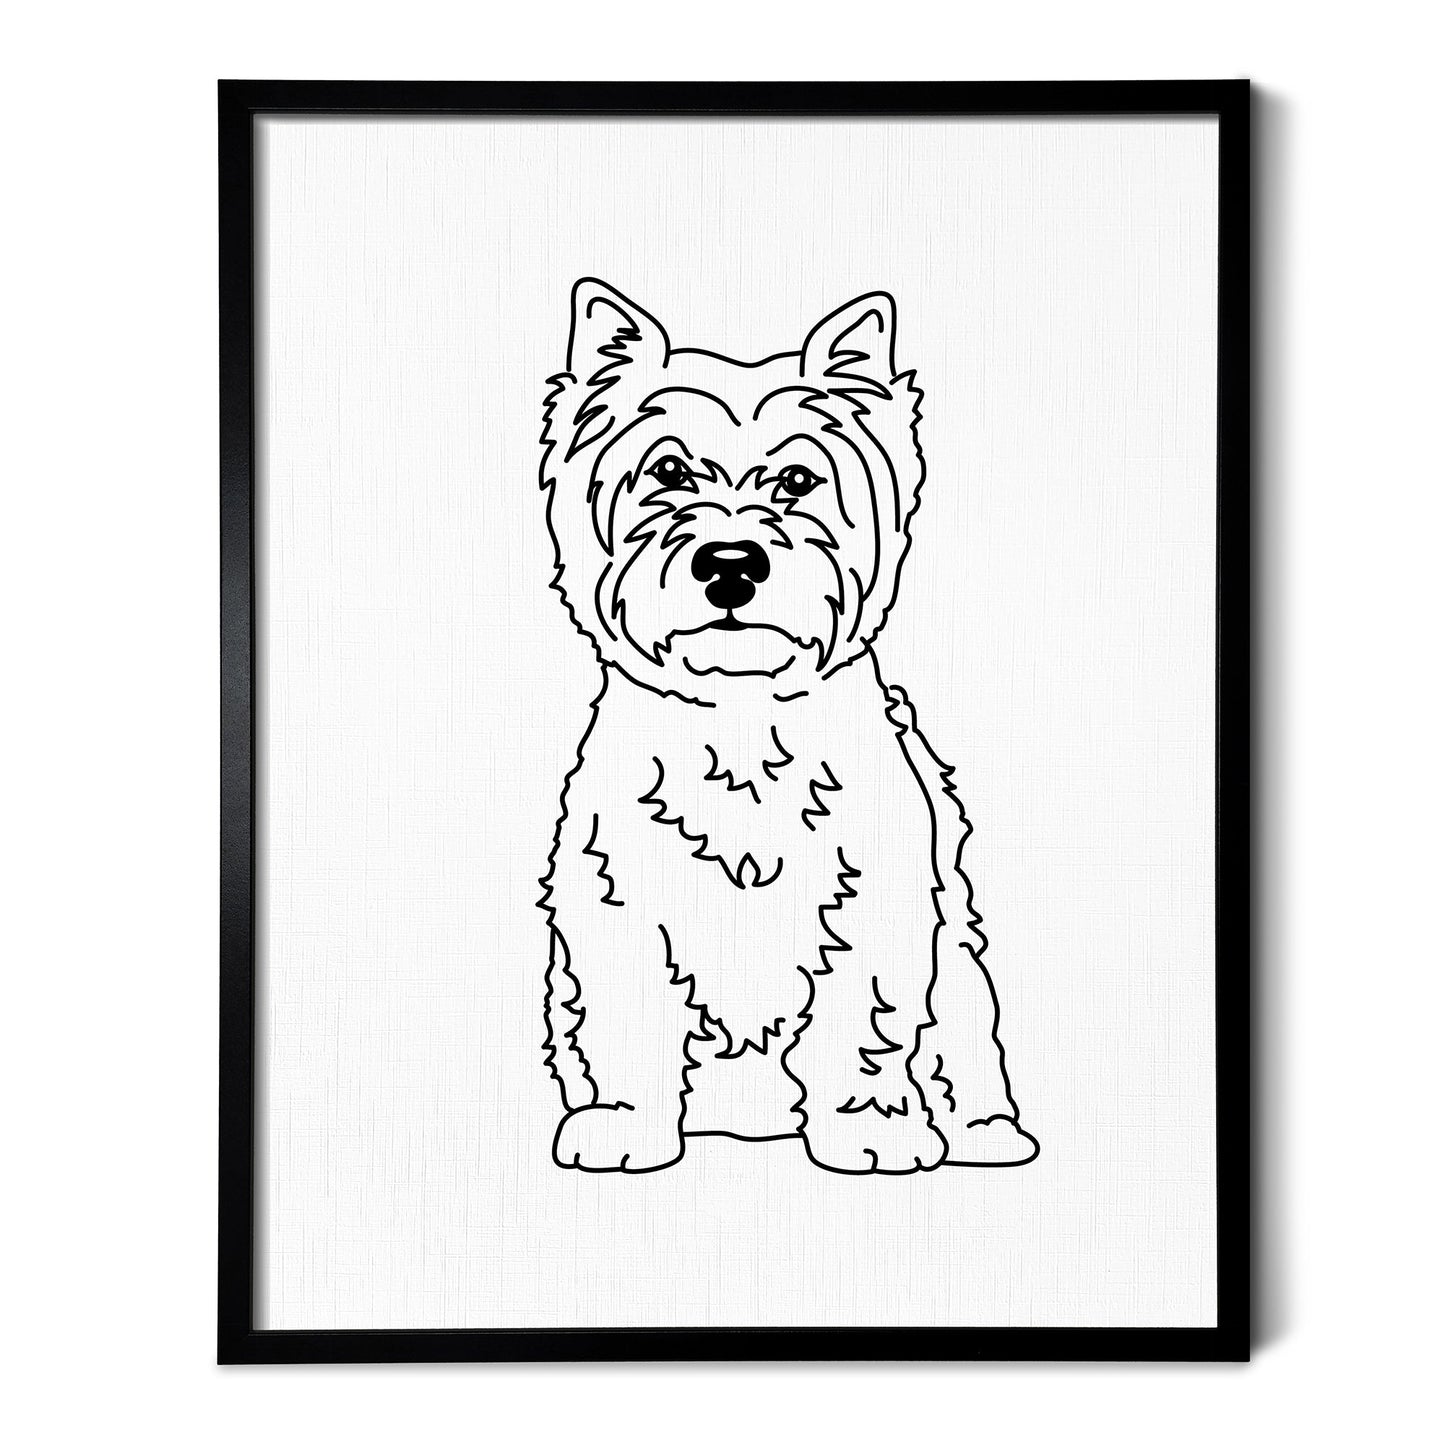 A line art drawing of a West Highland Terrier dog on white linen paper in a thin black picture frame